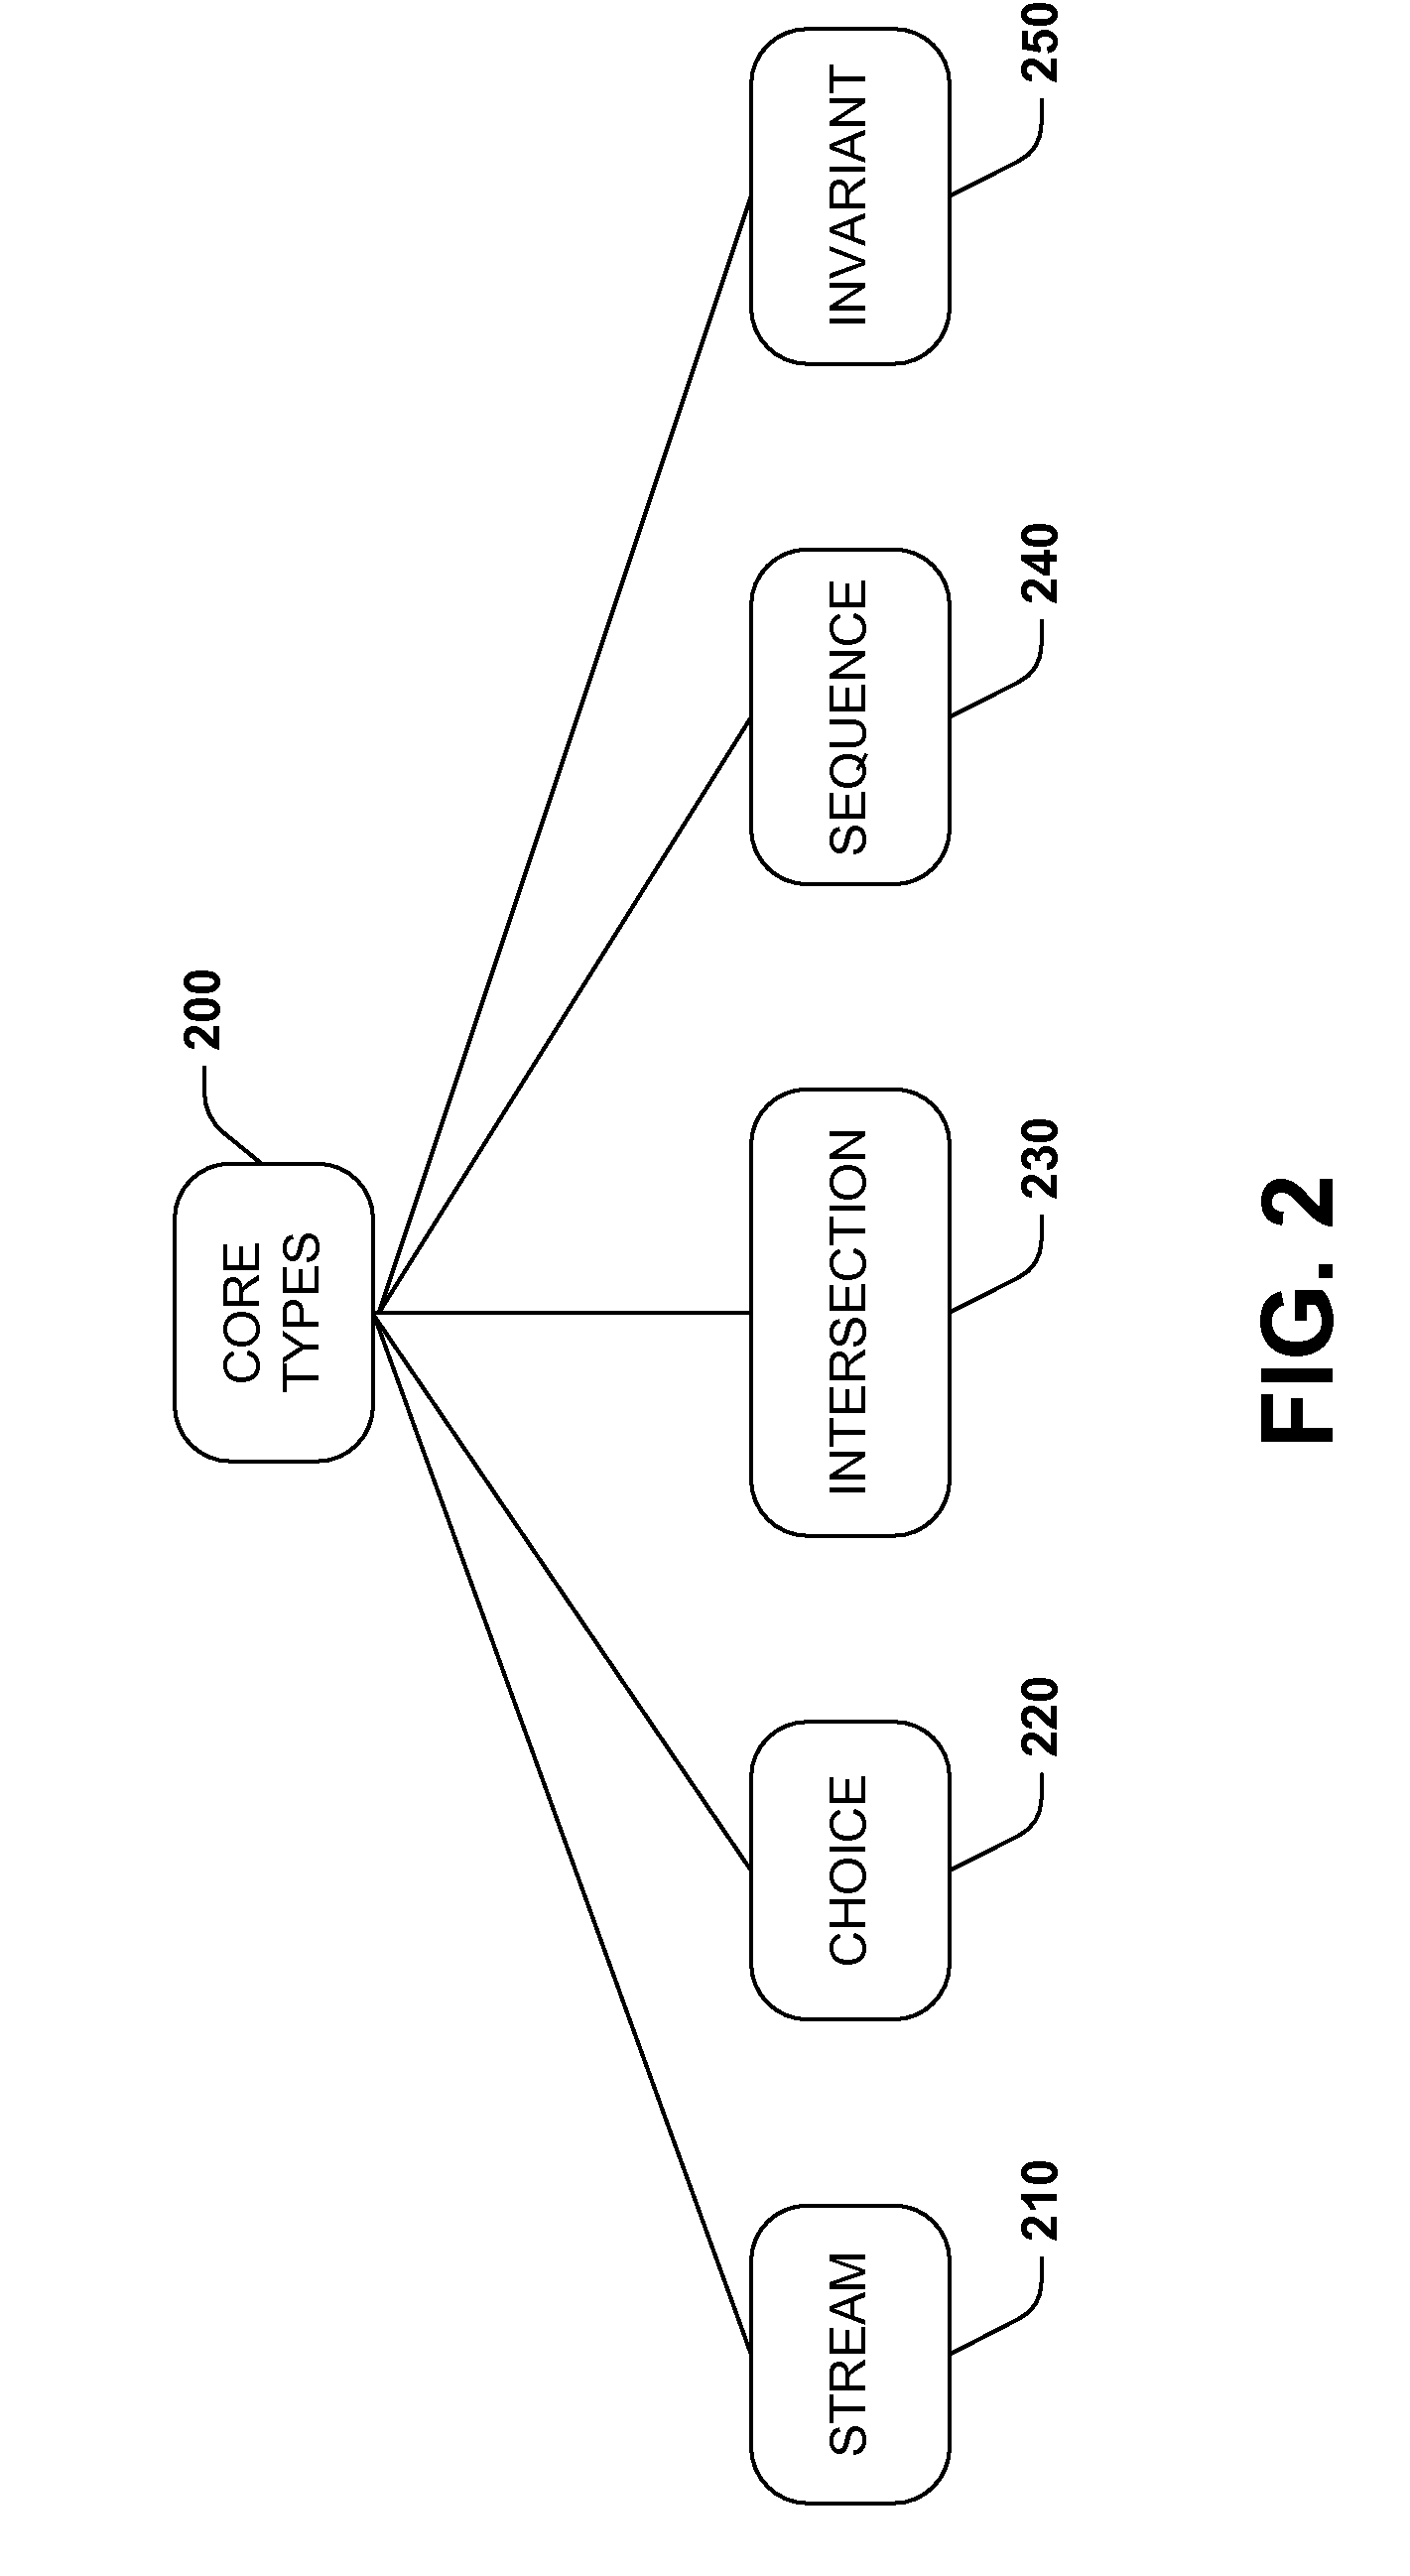 Core object-oriented type system for semi-structured data